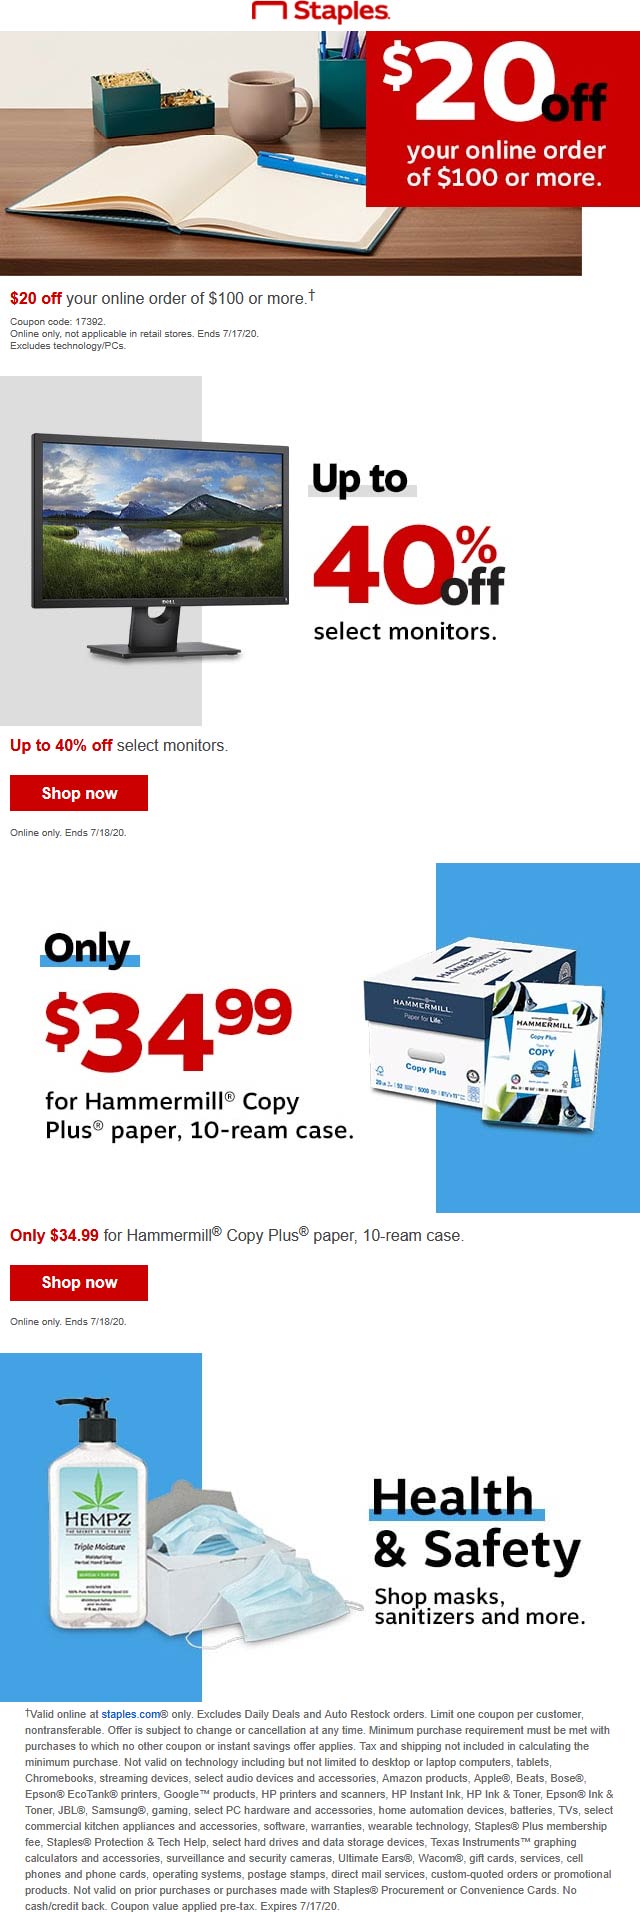 20 off 100 today online at Staples office supplies via promo code